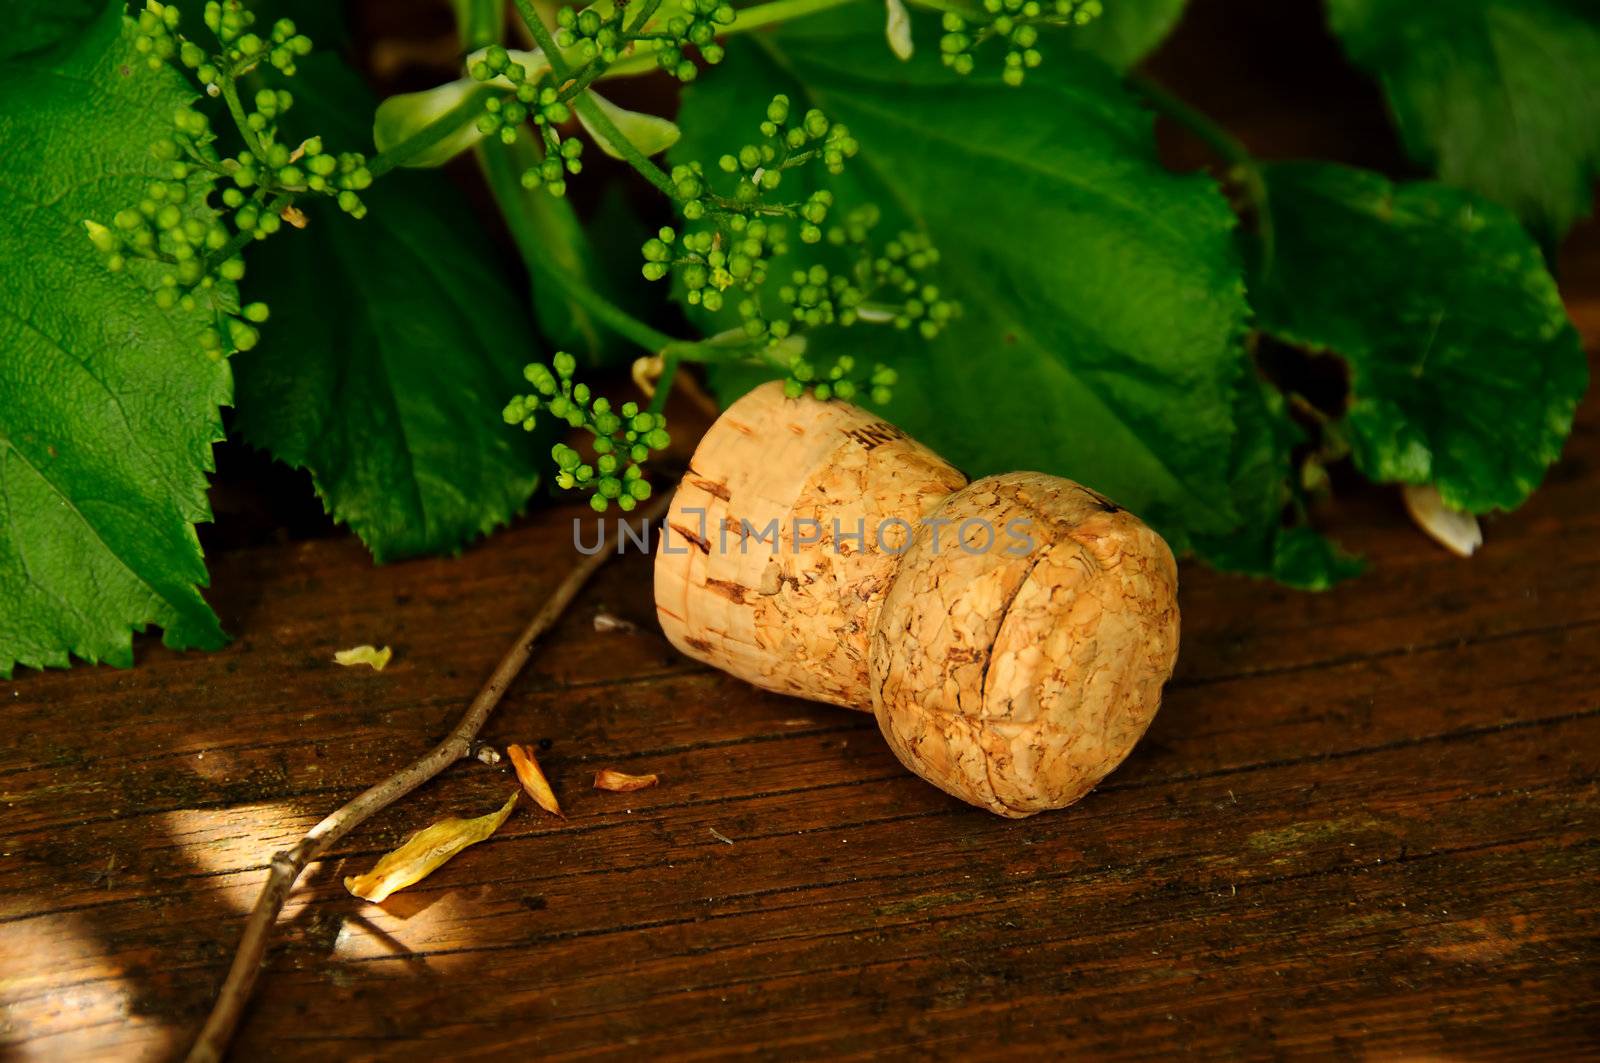 Champagne cork on the patio floor by GryT